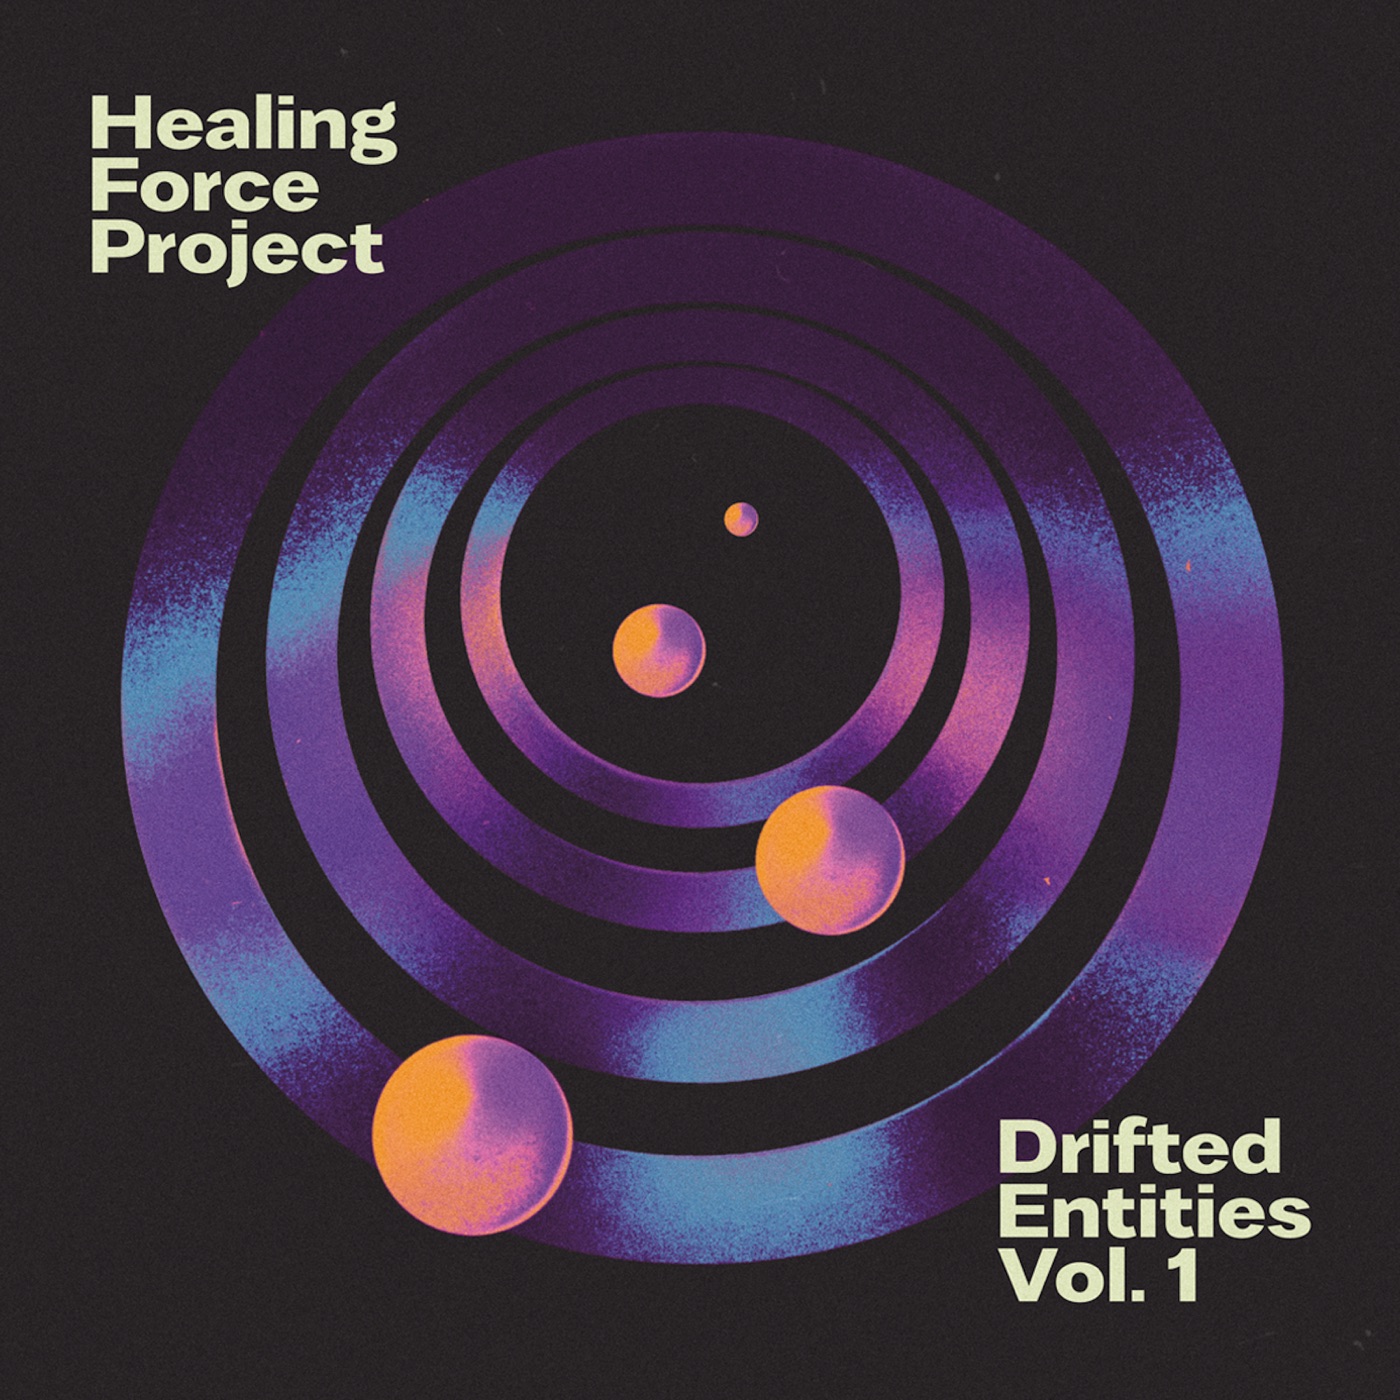 Drifted Entities, Vol. 1 by Healing Force Project